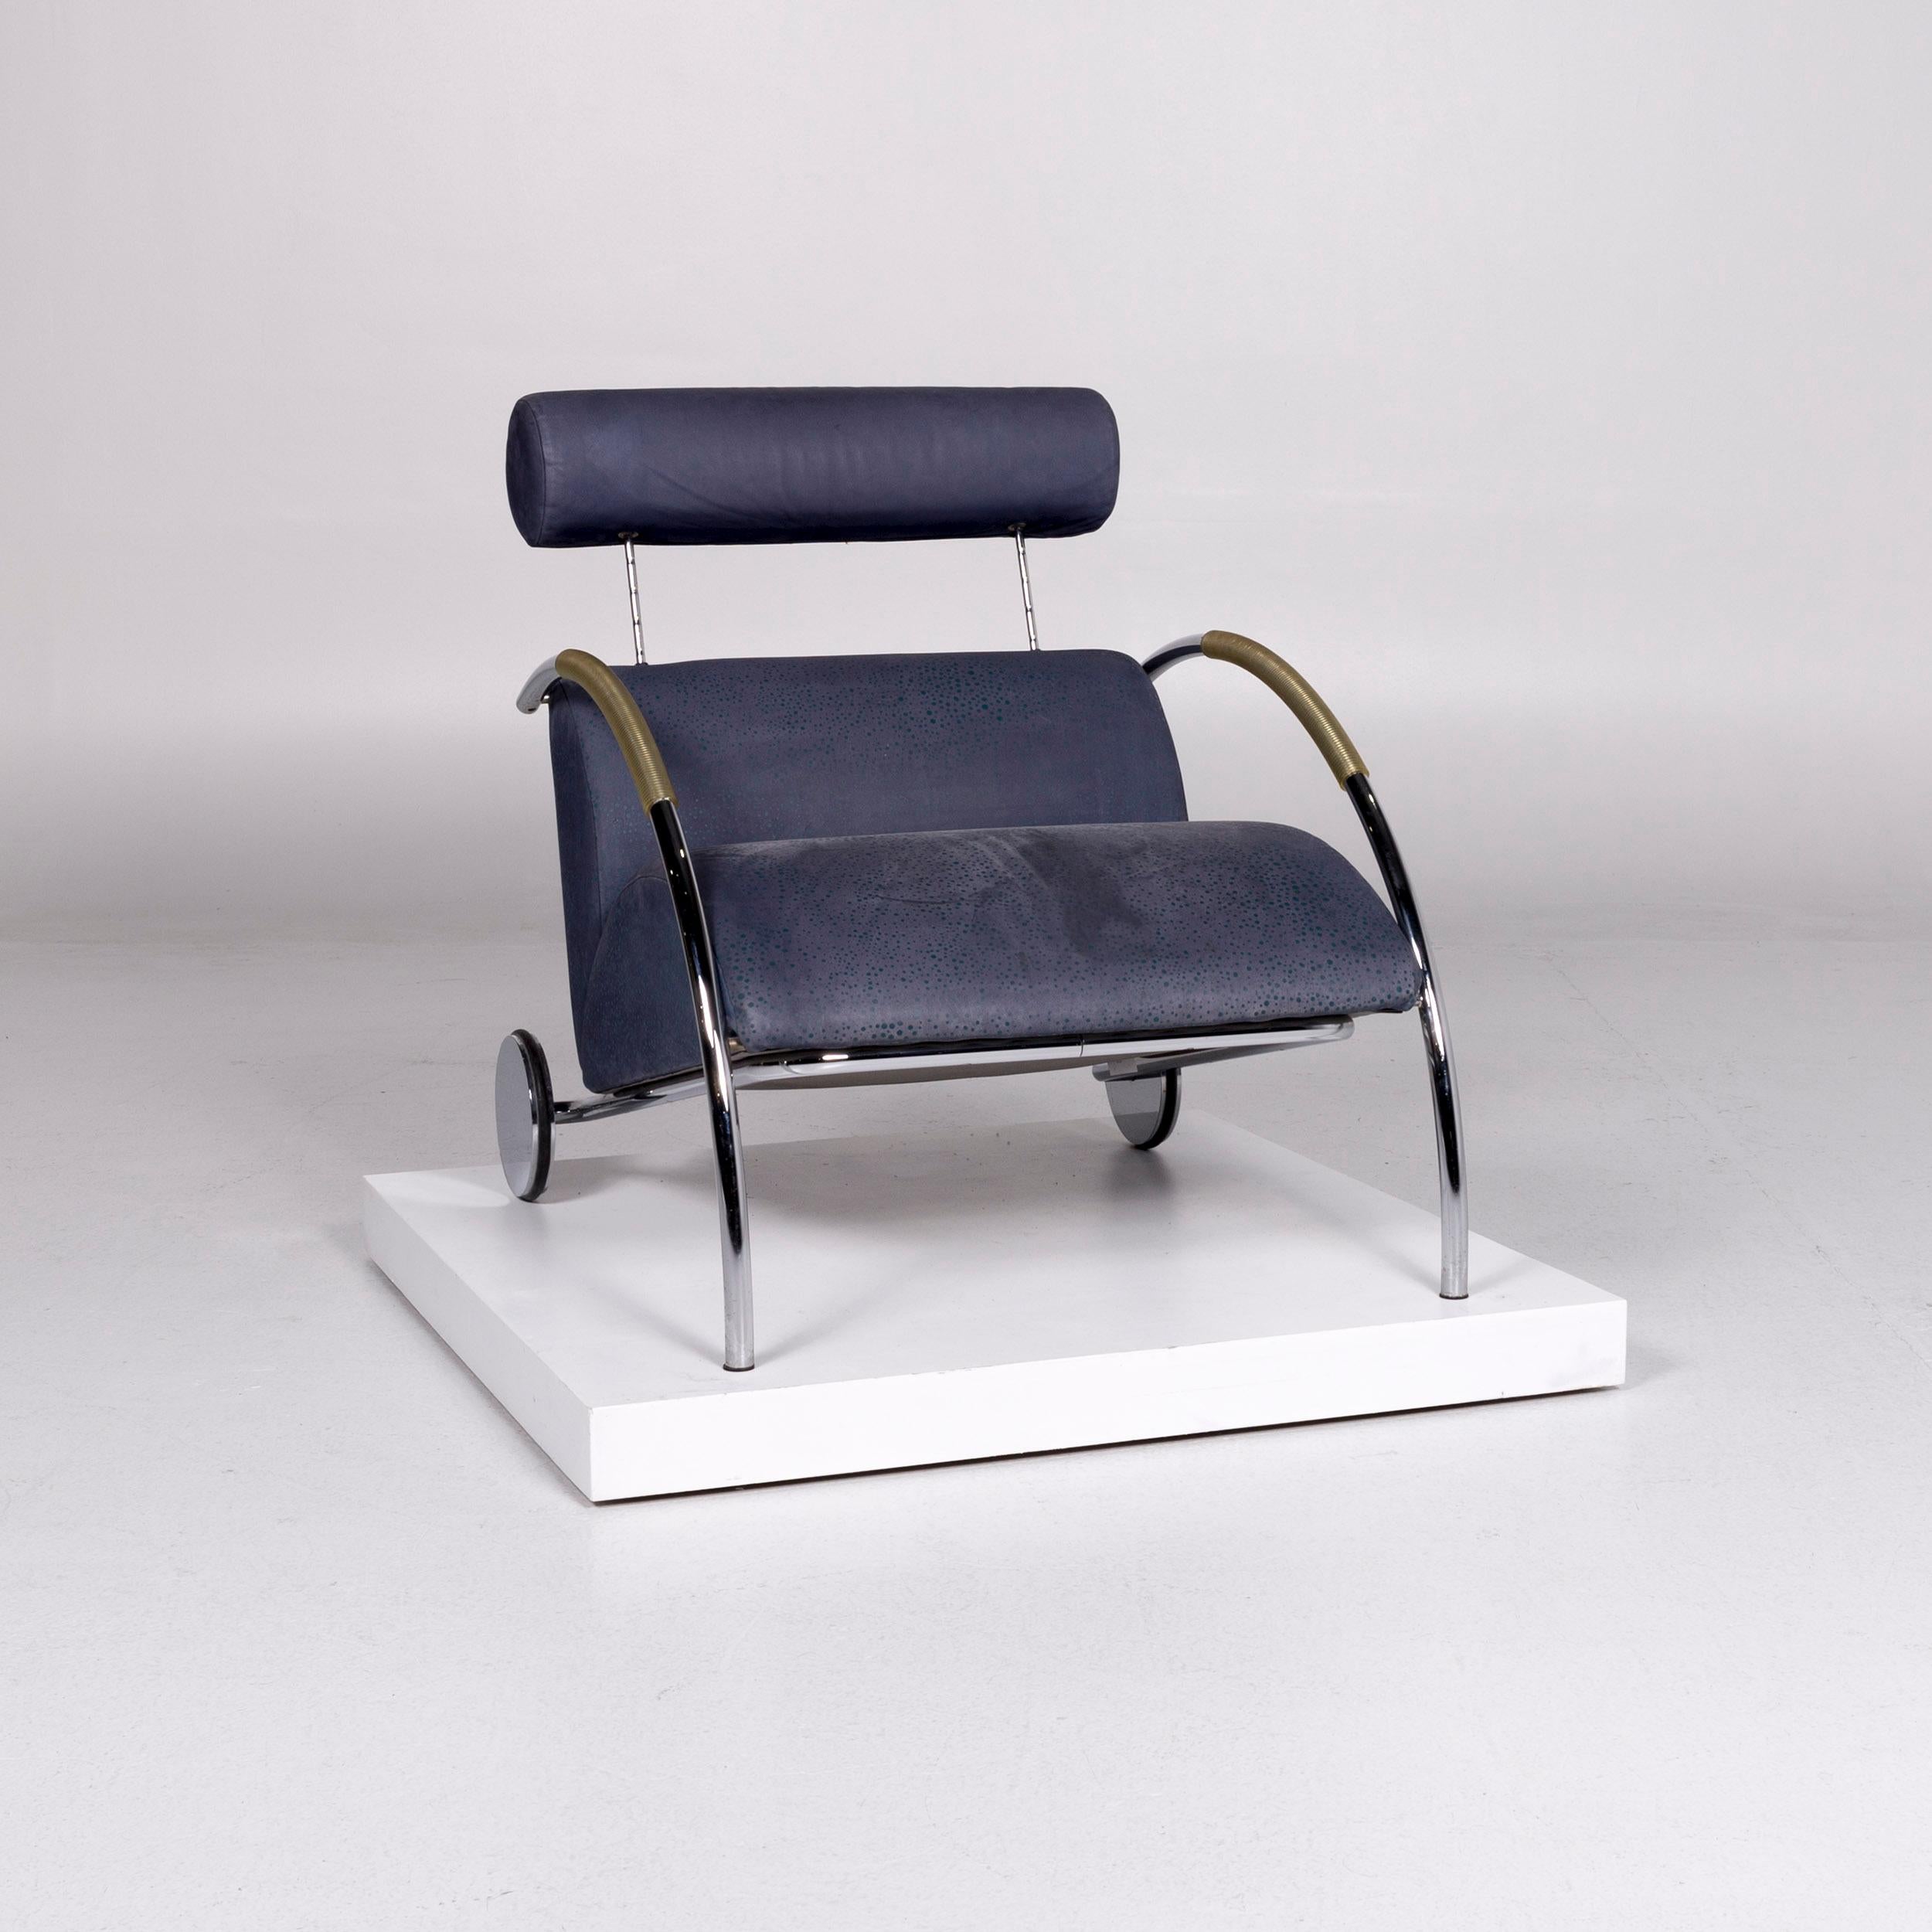 We bring to you a COR cycle leather armchair blue feature Peter Maly.

 Product measurements in centimeters:
 
Depth 86
Width 73
Height 72
Seat-height 43
Rest-height 60
Seat-depth 53
Seat-width 68
Back-height 31.
       